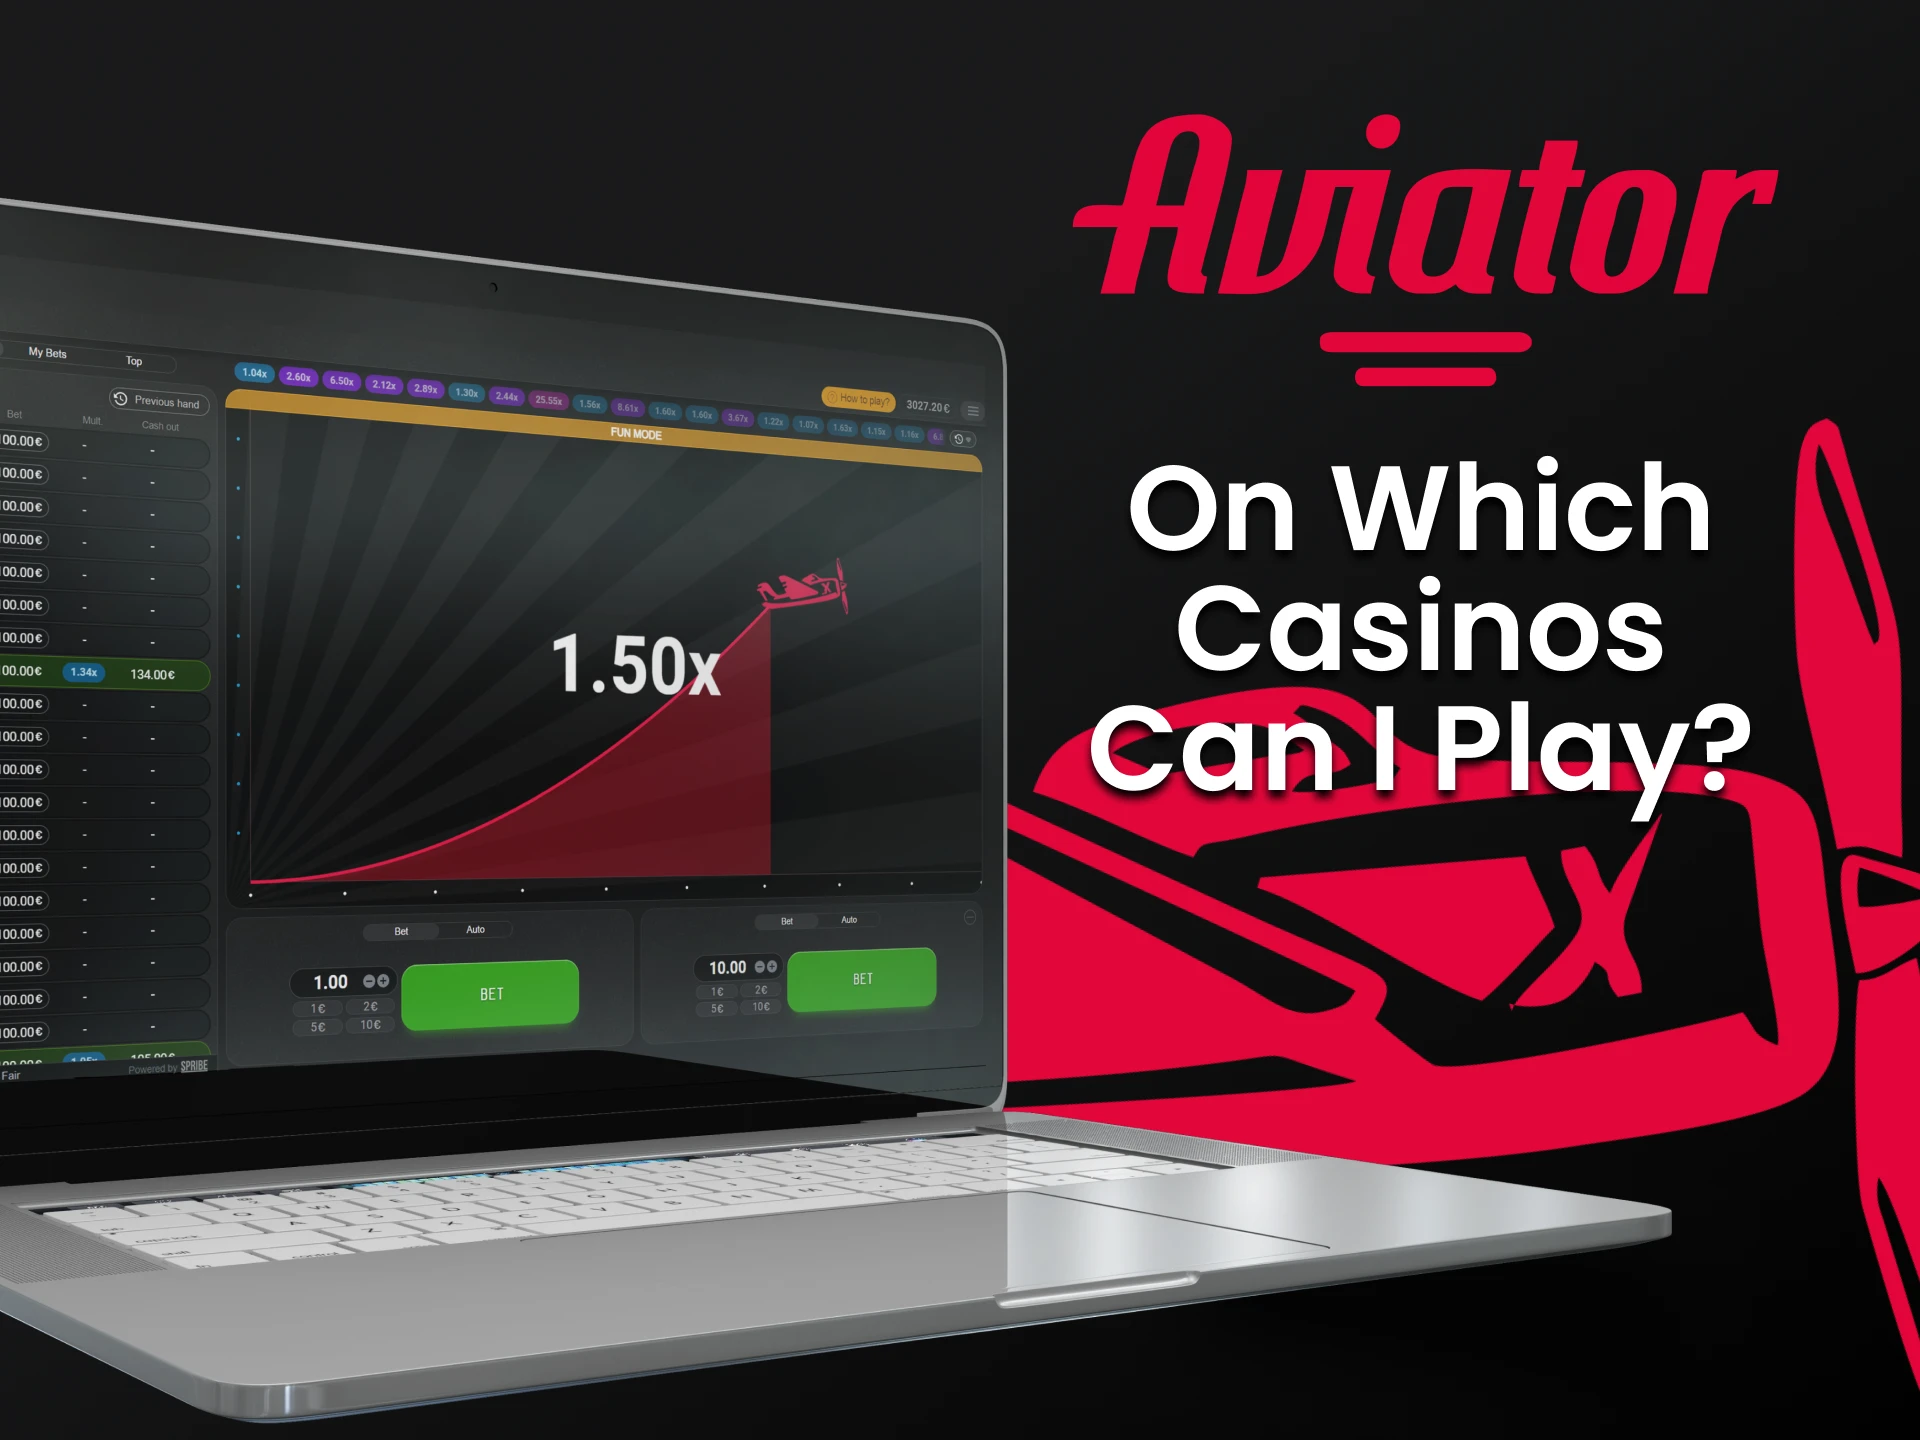 Choose a convenient casino for playing Aviator.